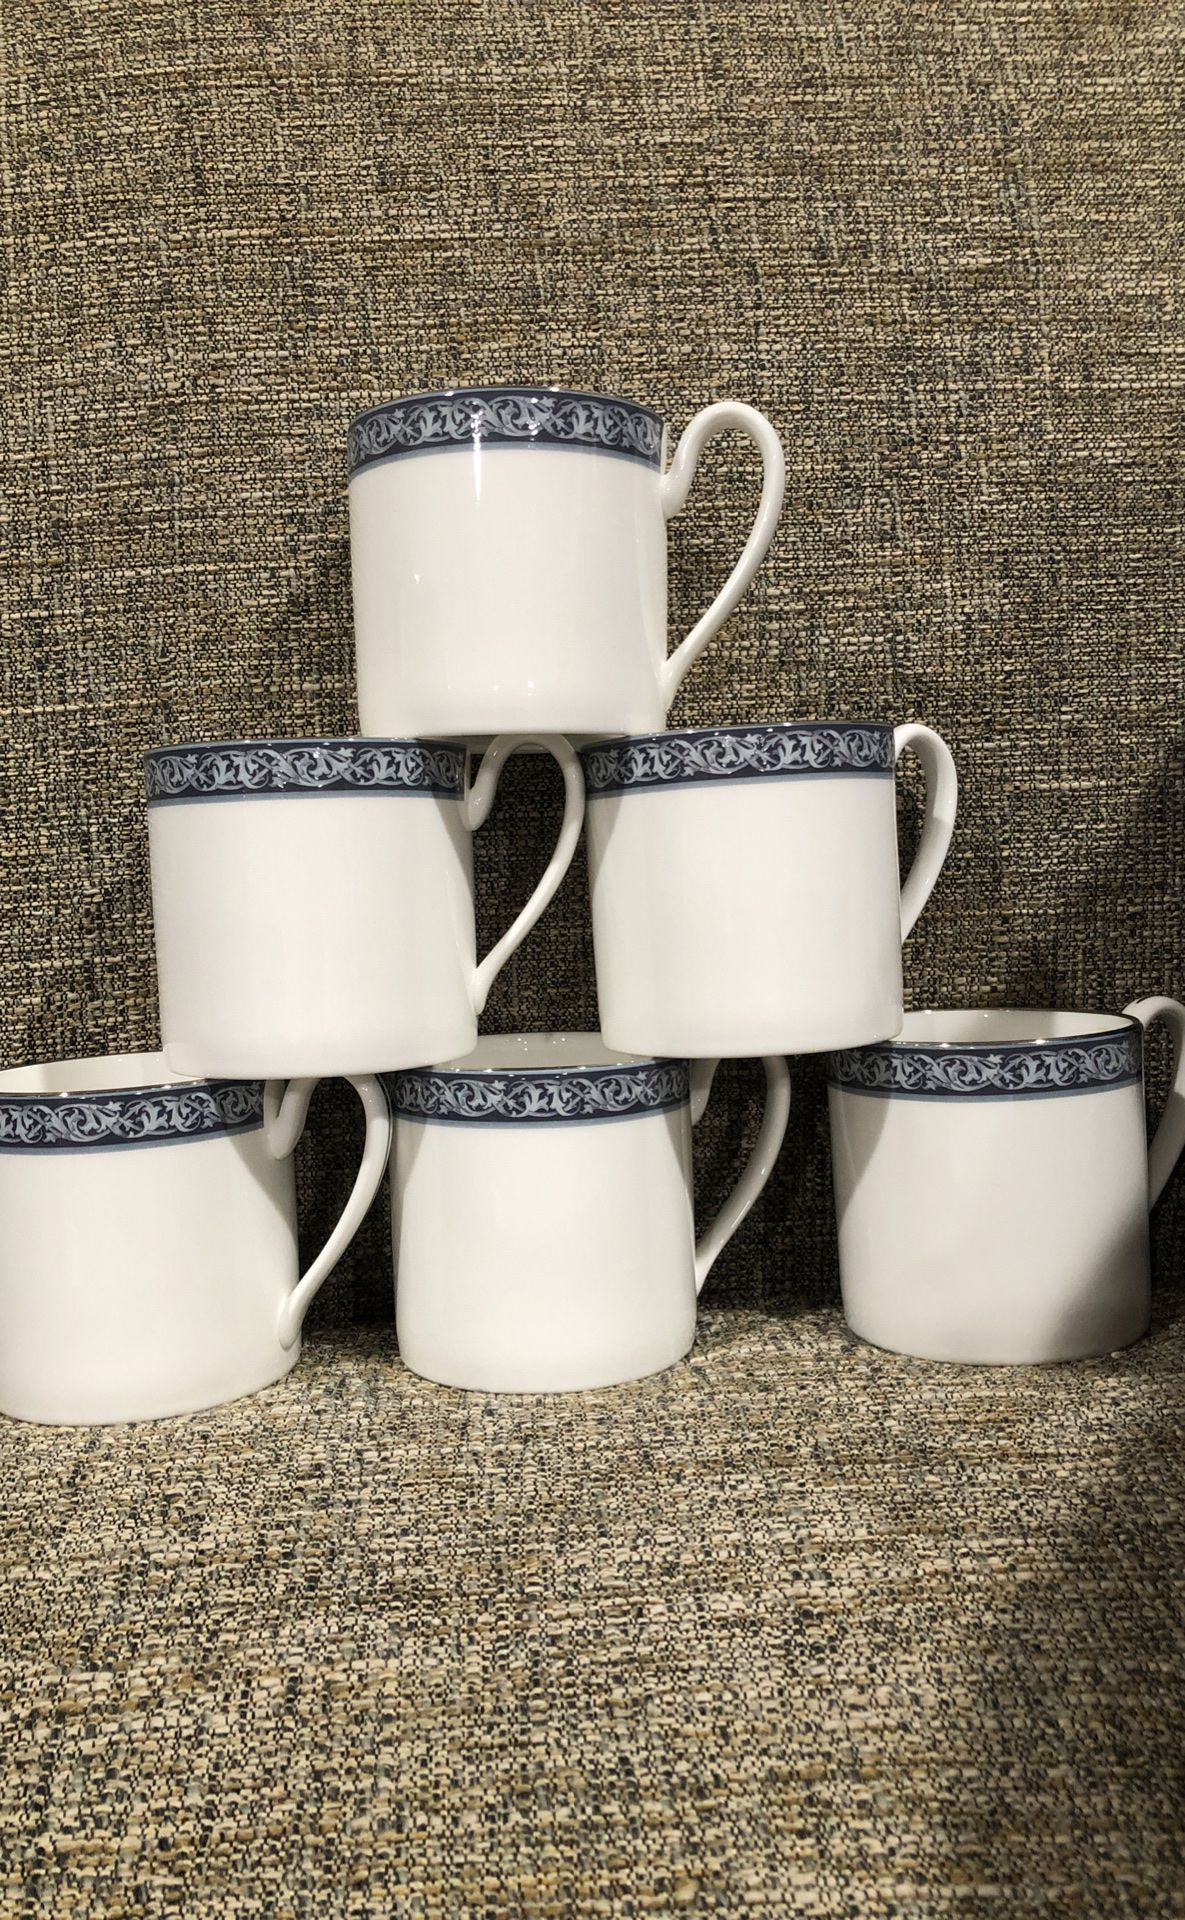 Set of 6 Waterford Tea or Coffee cups